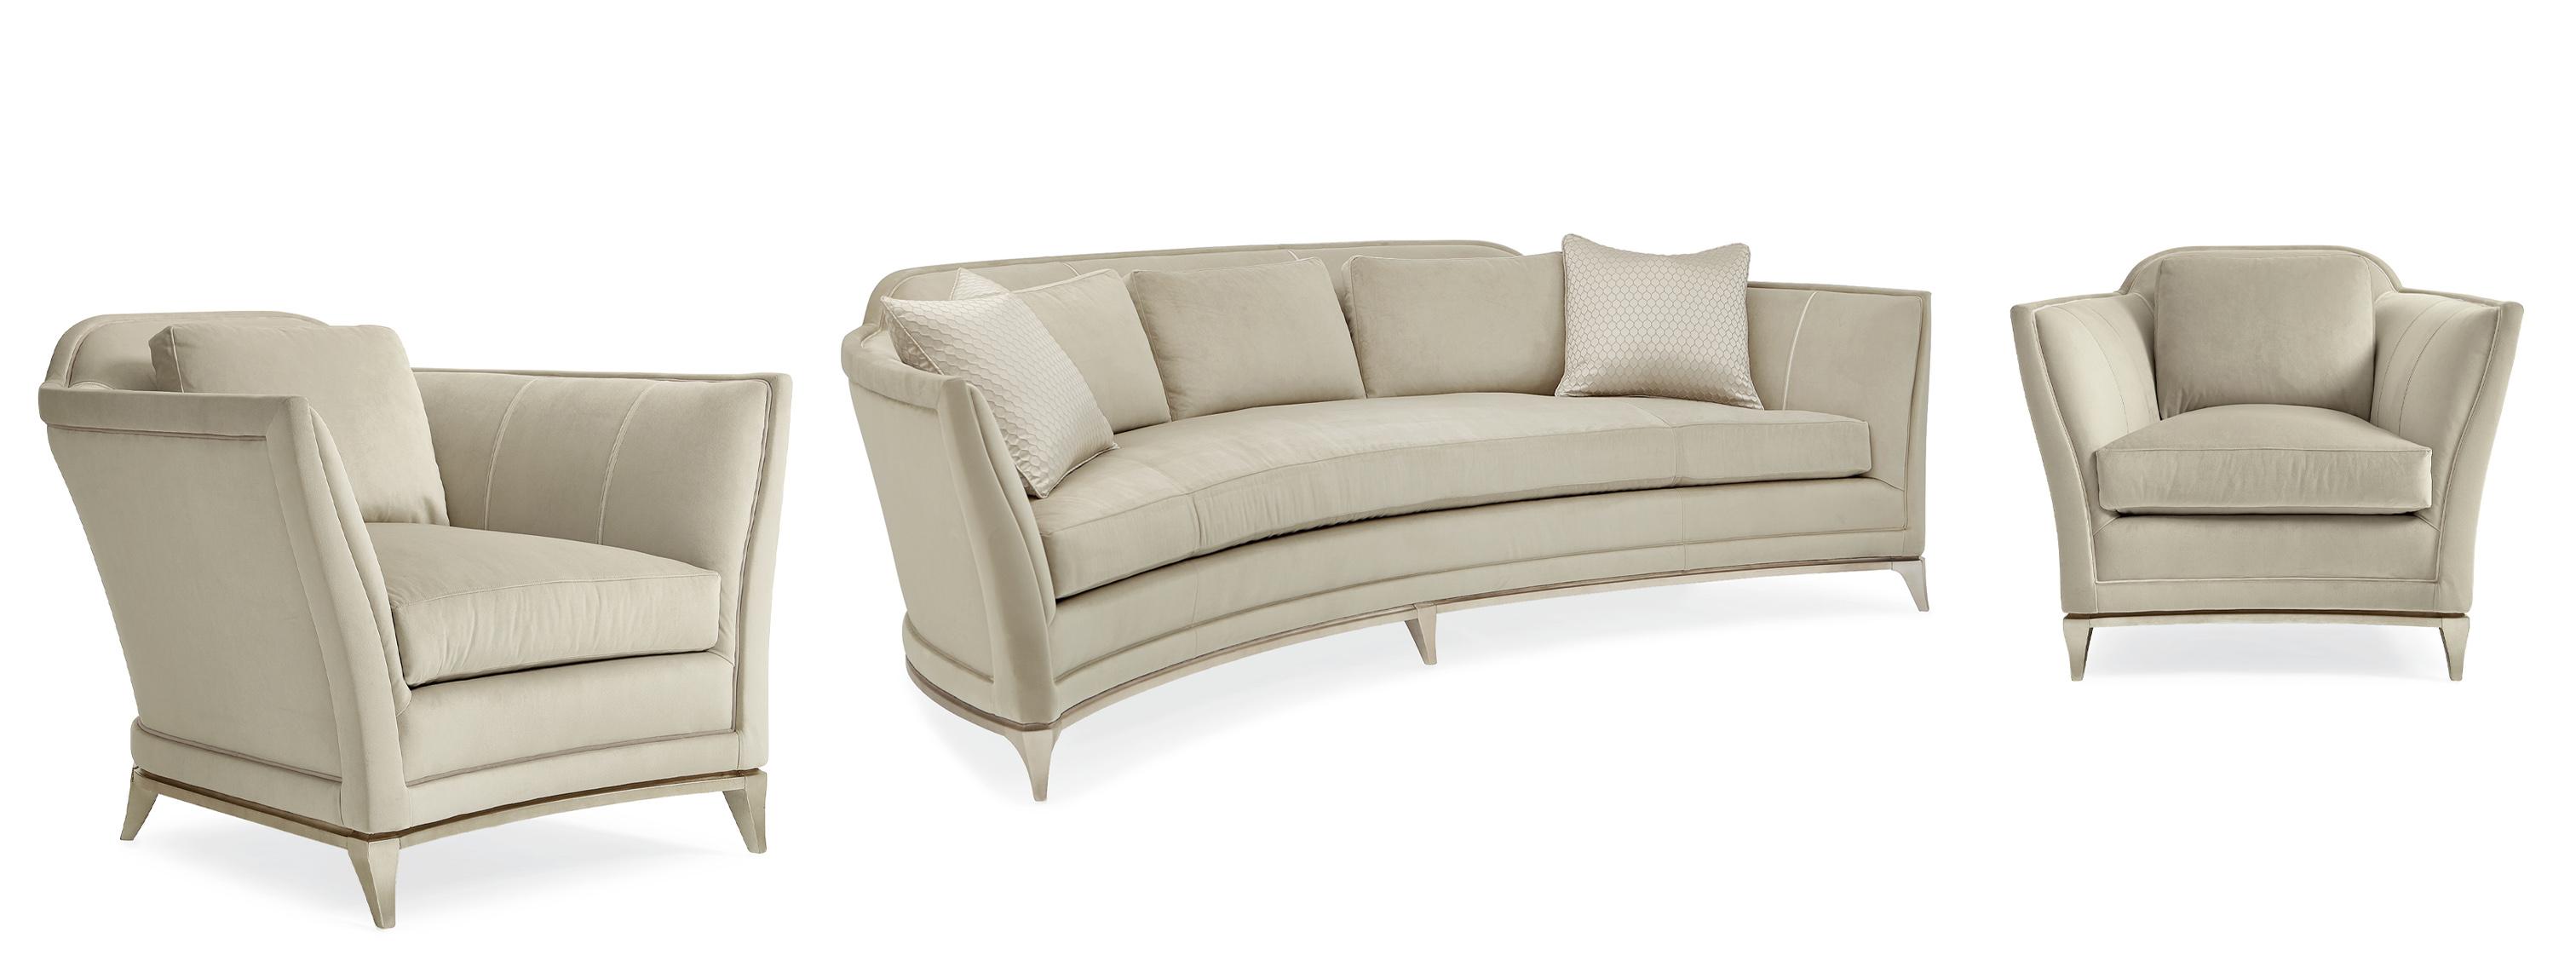 Contemporary Sofa and 2 Chairs Bend The Rules UPH-417-016-A -Set-3 in Beige Velvet